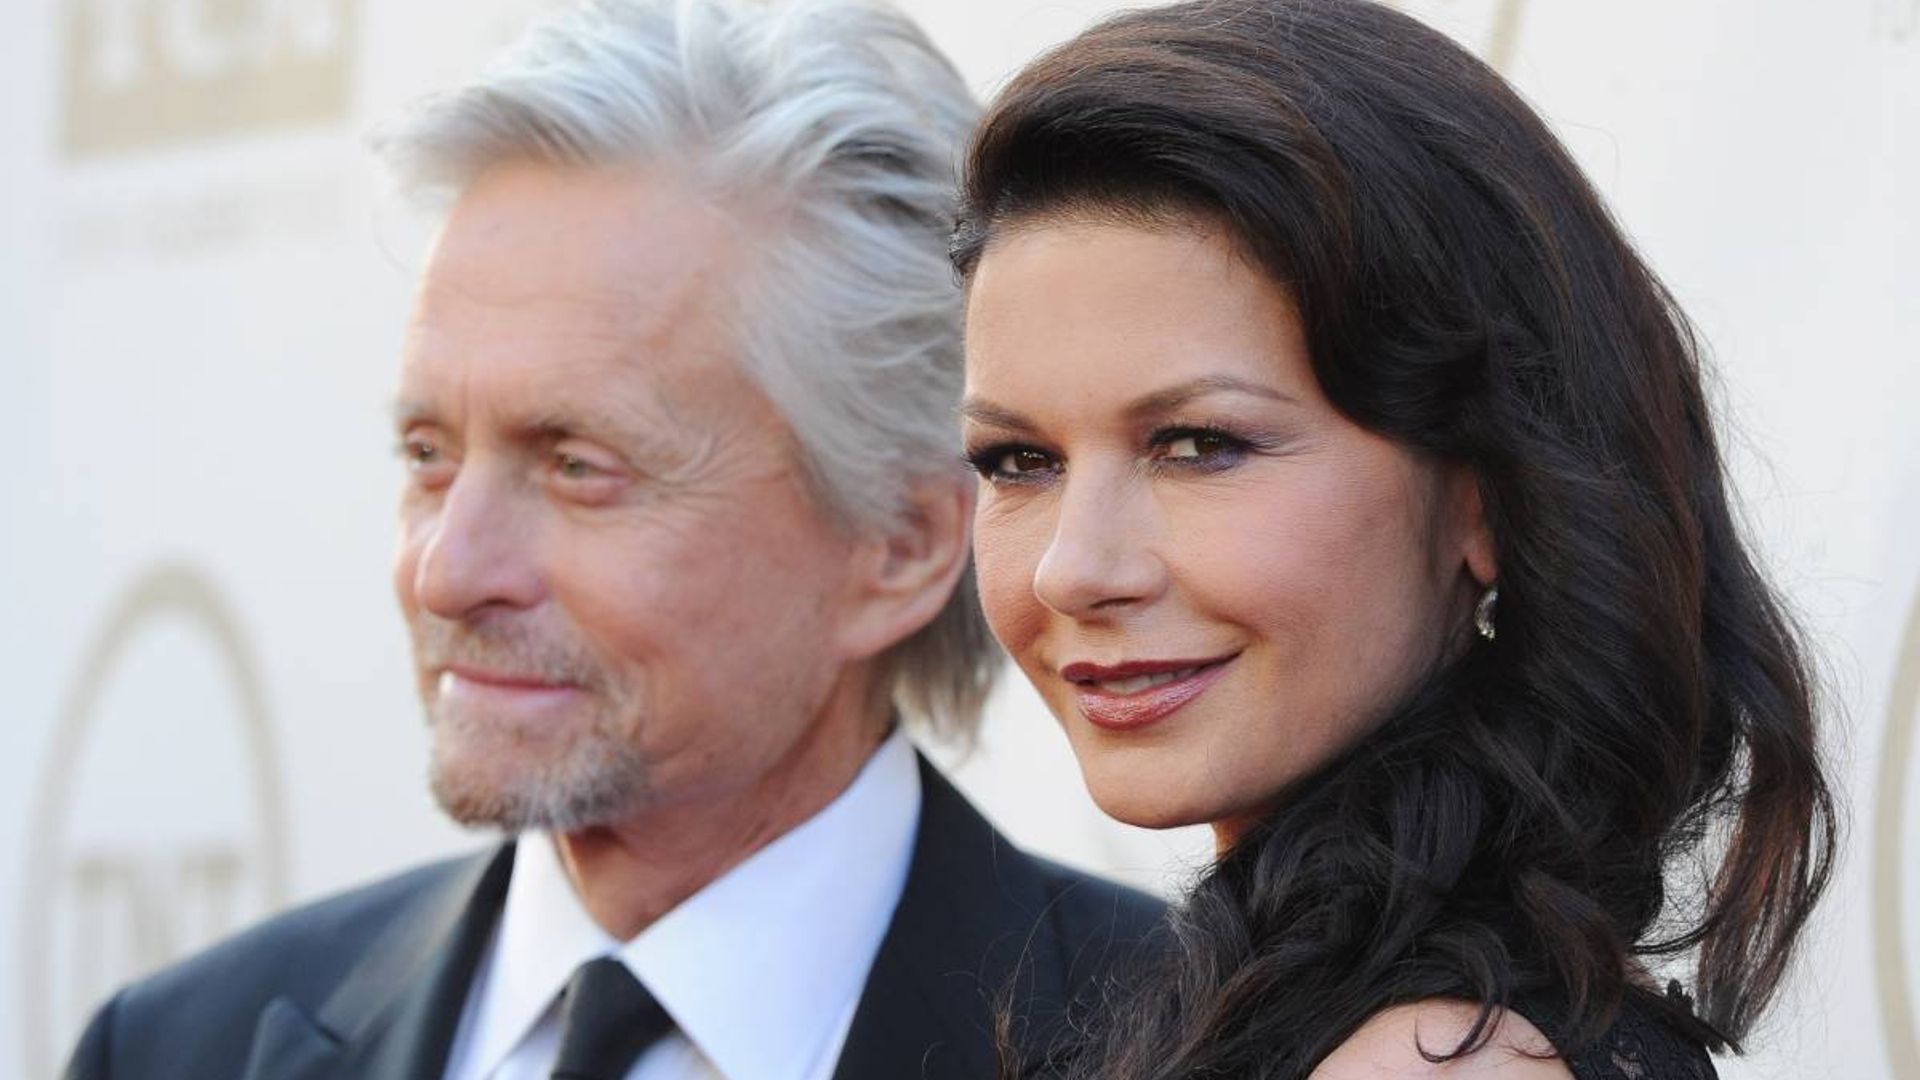 Catherine Zeta-Jones shares incredible family video inside unseen room in vacation home